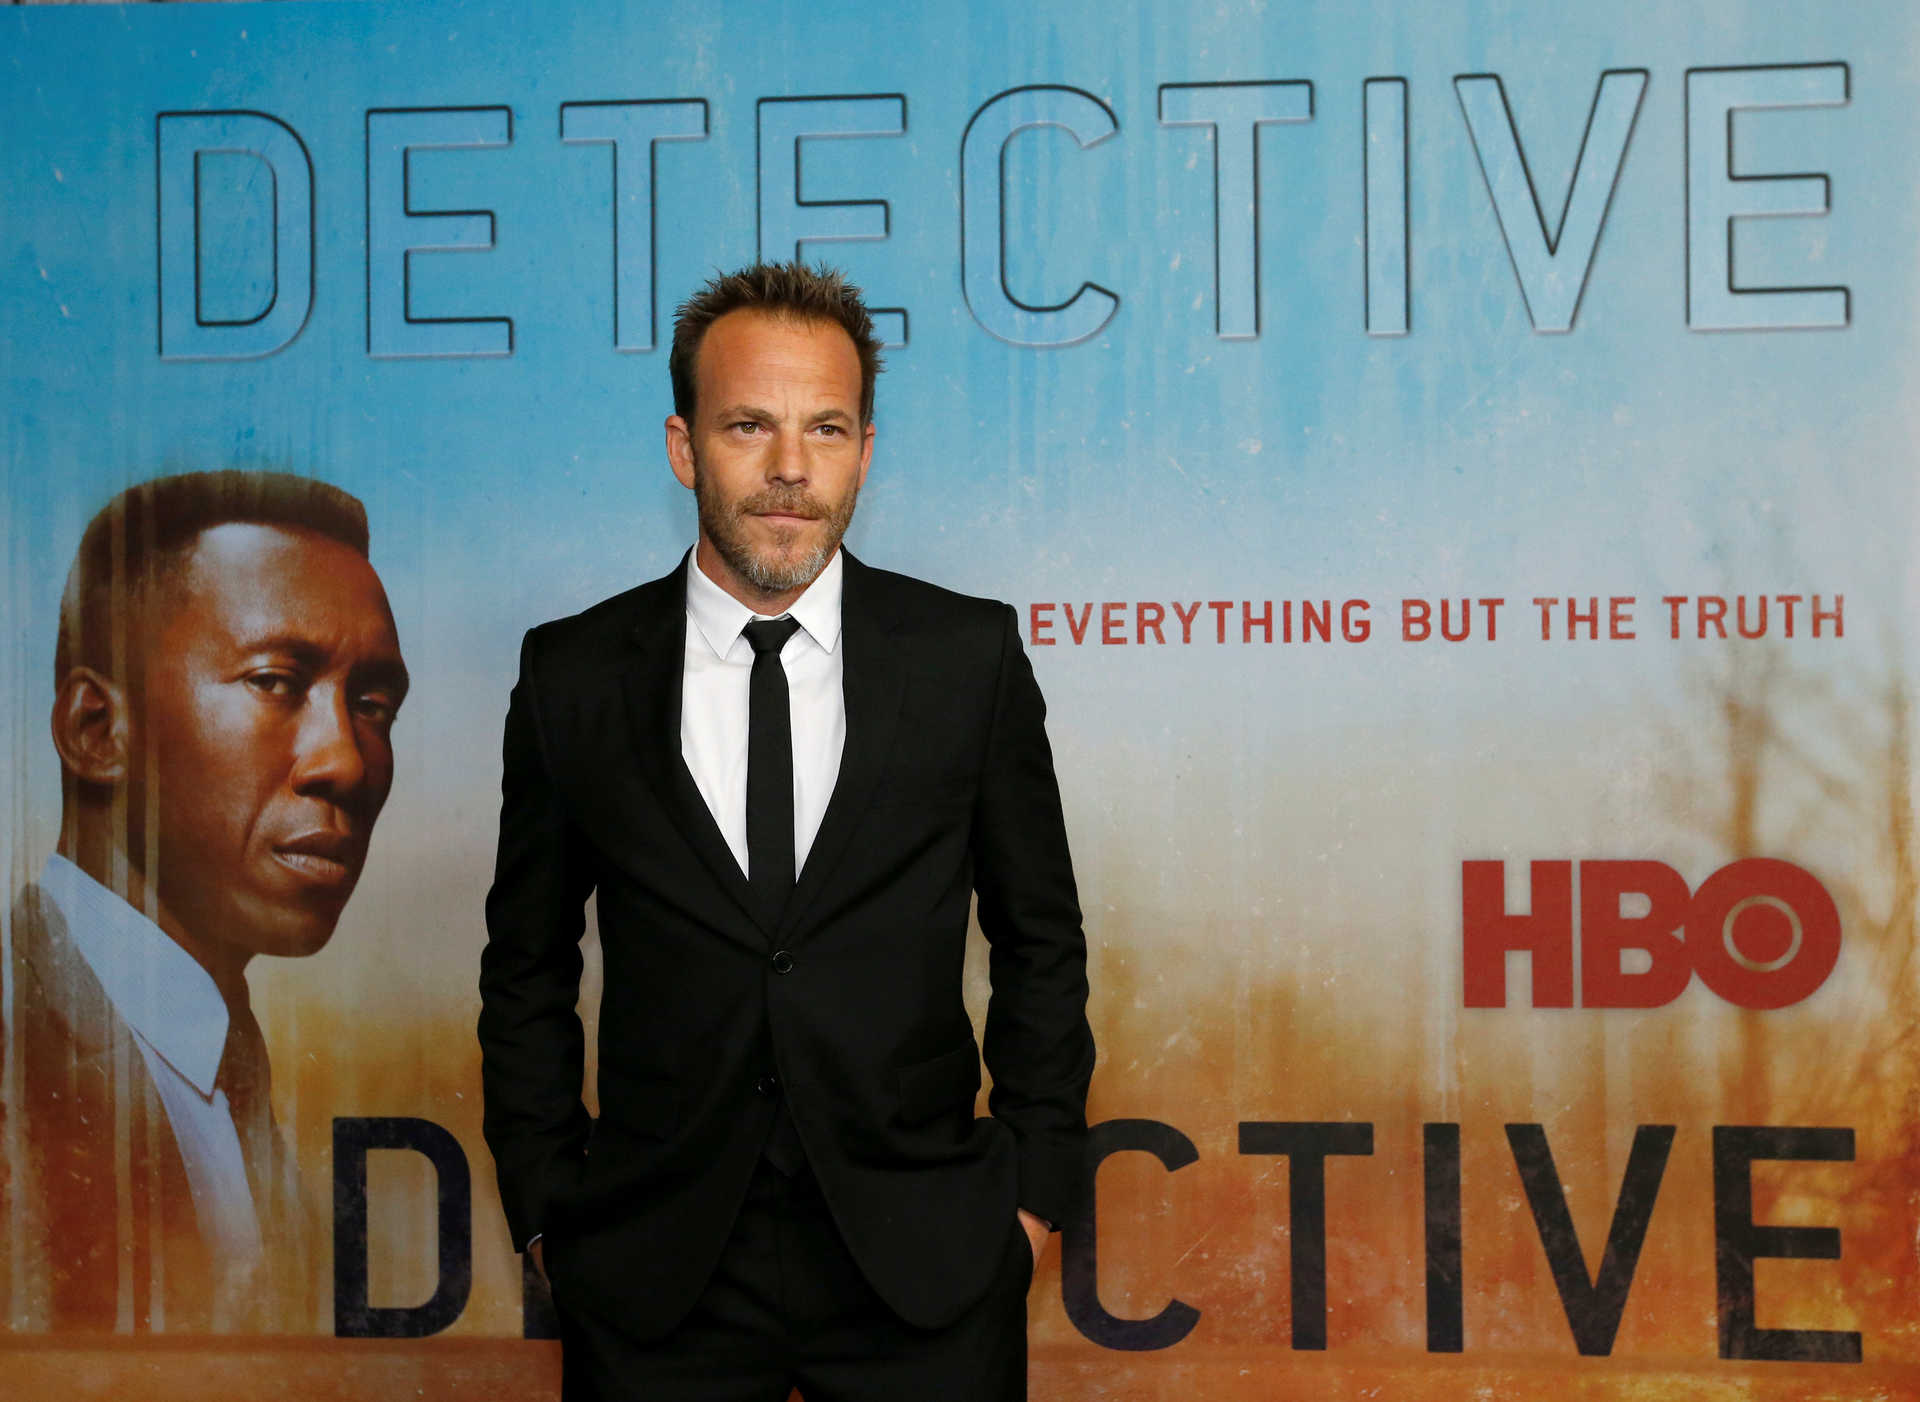 Cast member Dorff poses at the premiere for season 3 of the television series “True Detective” in Los Angeles